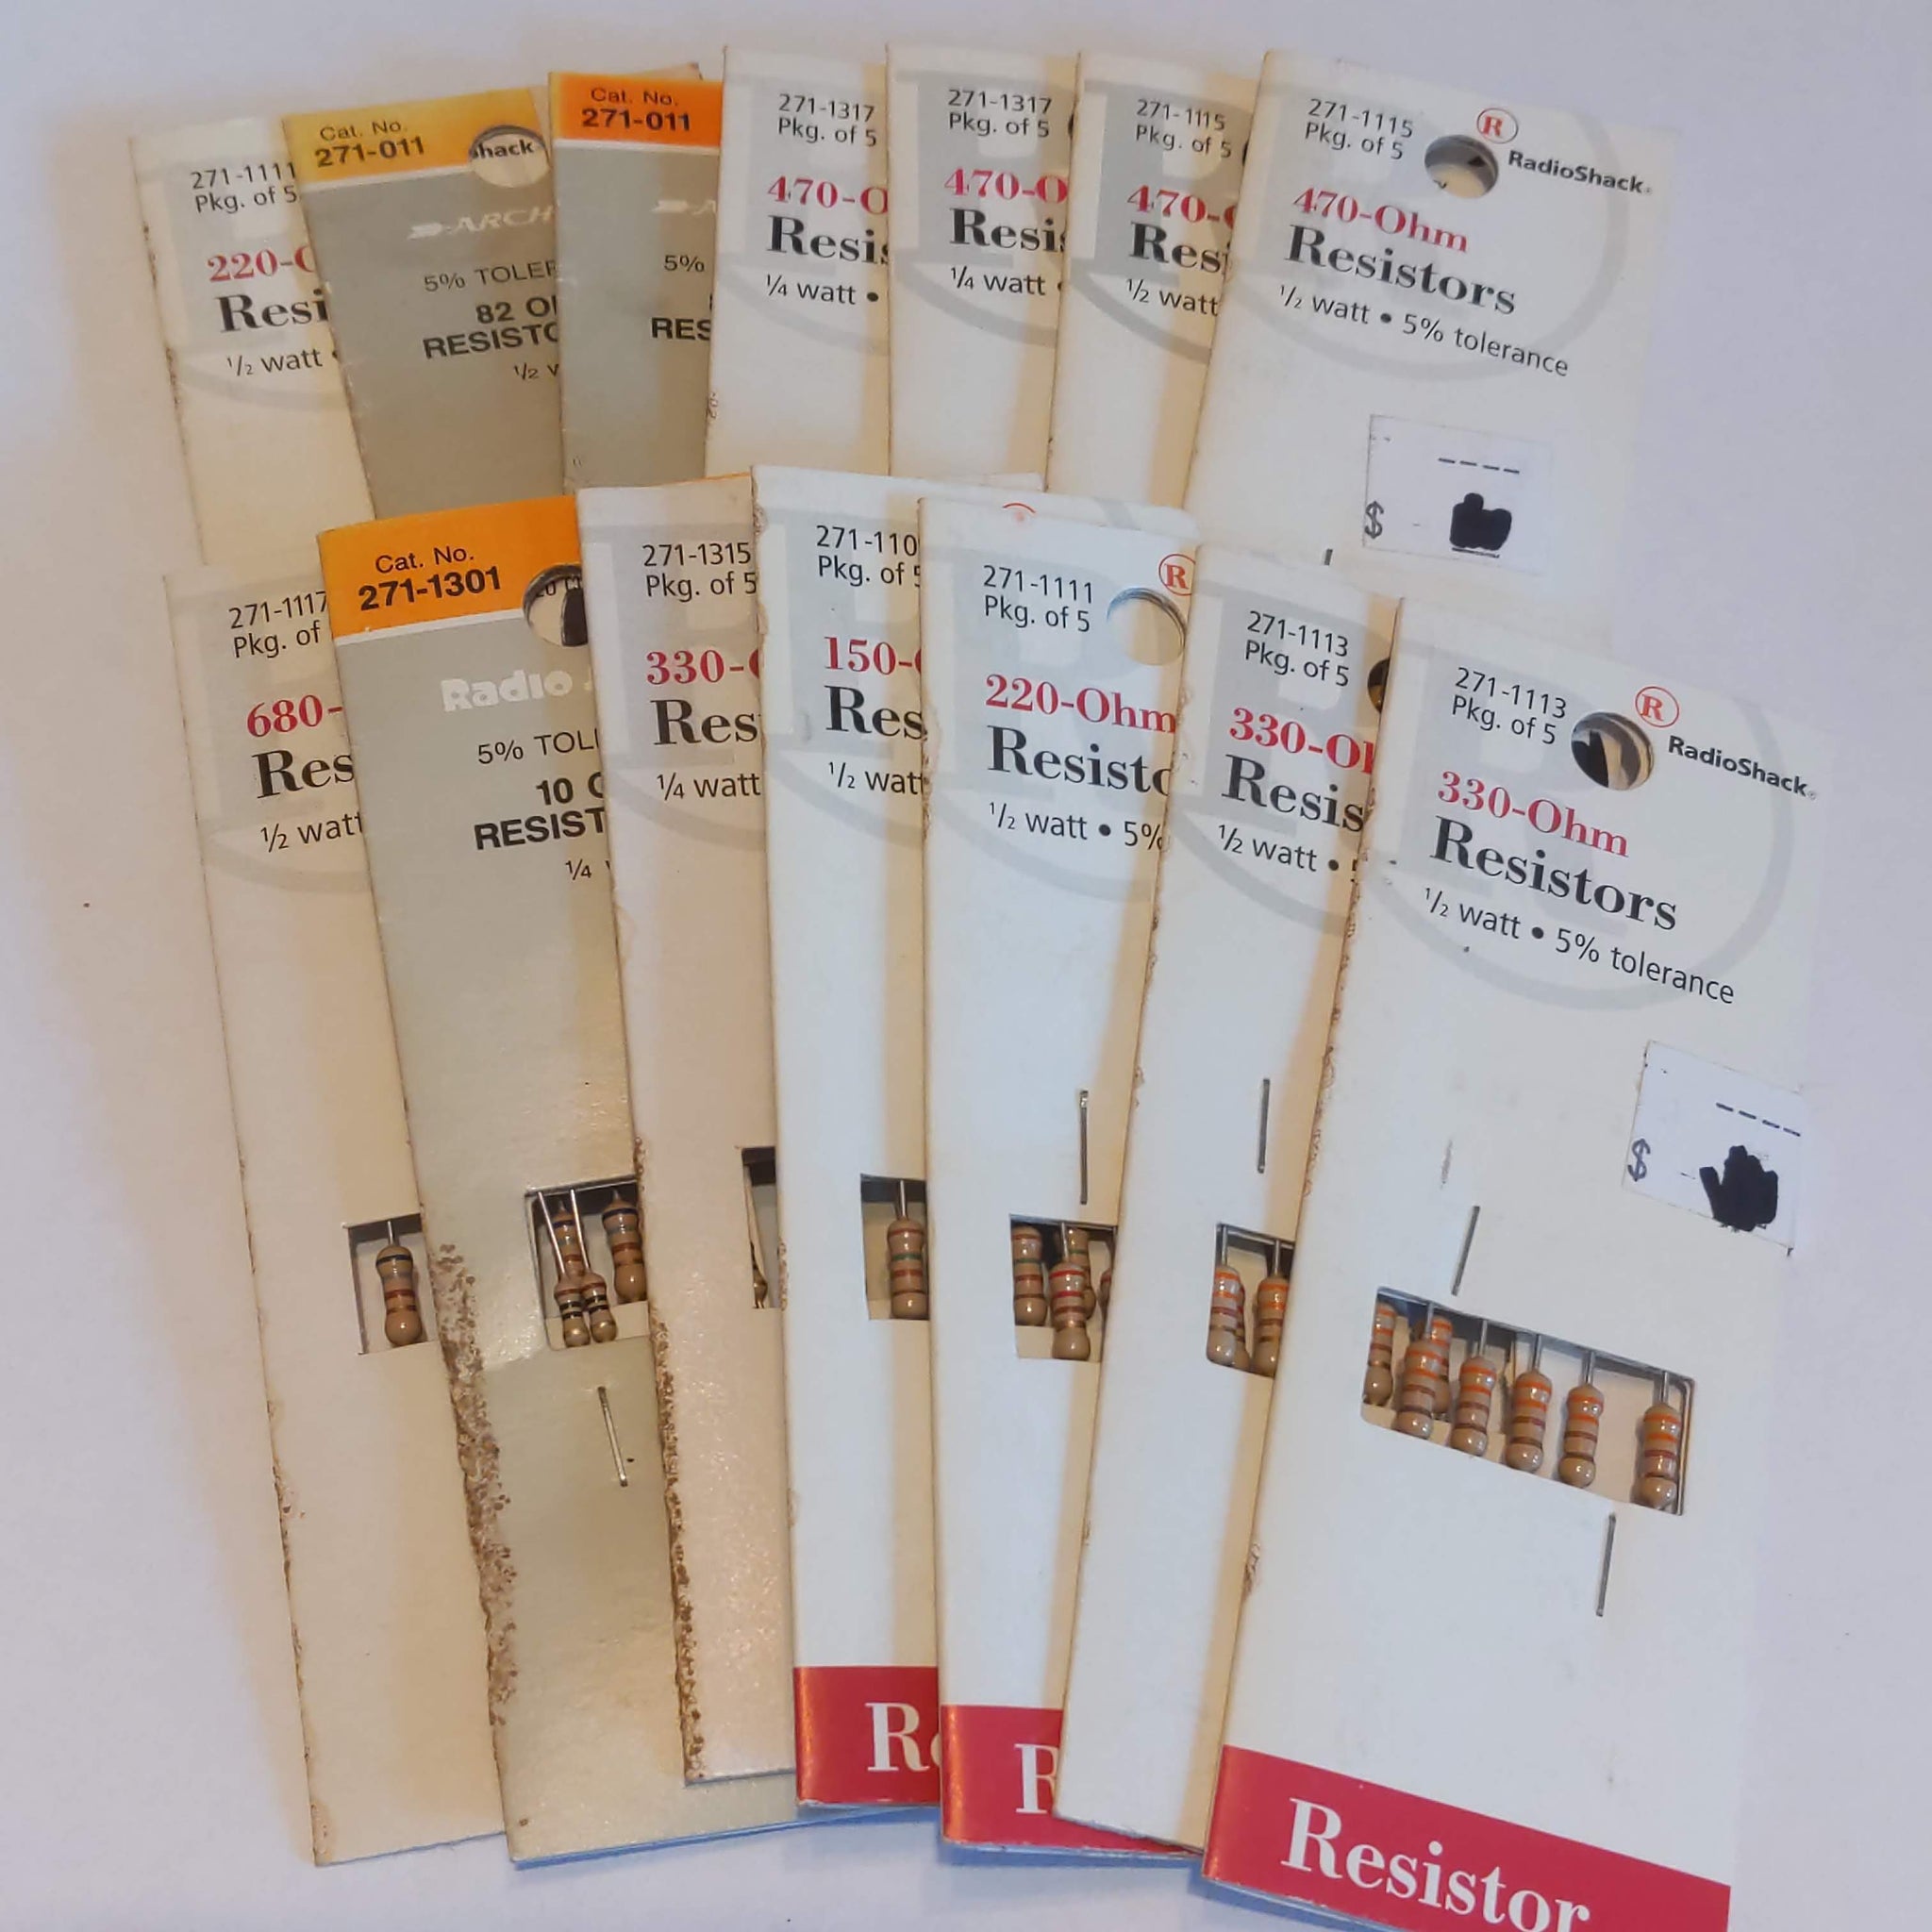 76 Radio Shack NOS Resistors, See Listing For Values And Counts